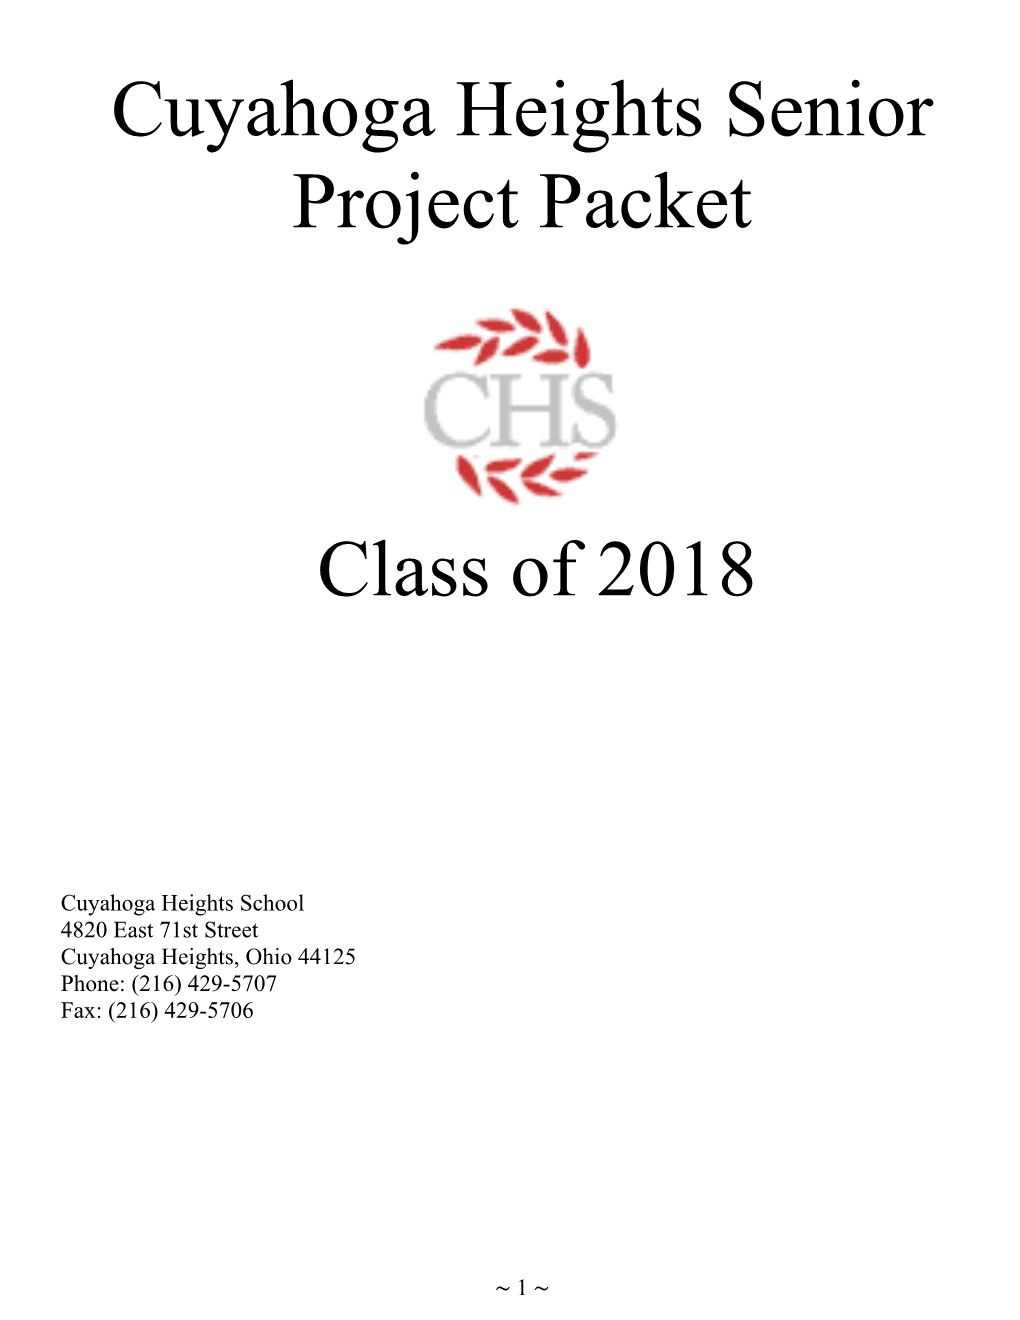 Cuyahoga Heights Senior Project Packet